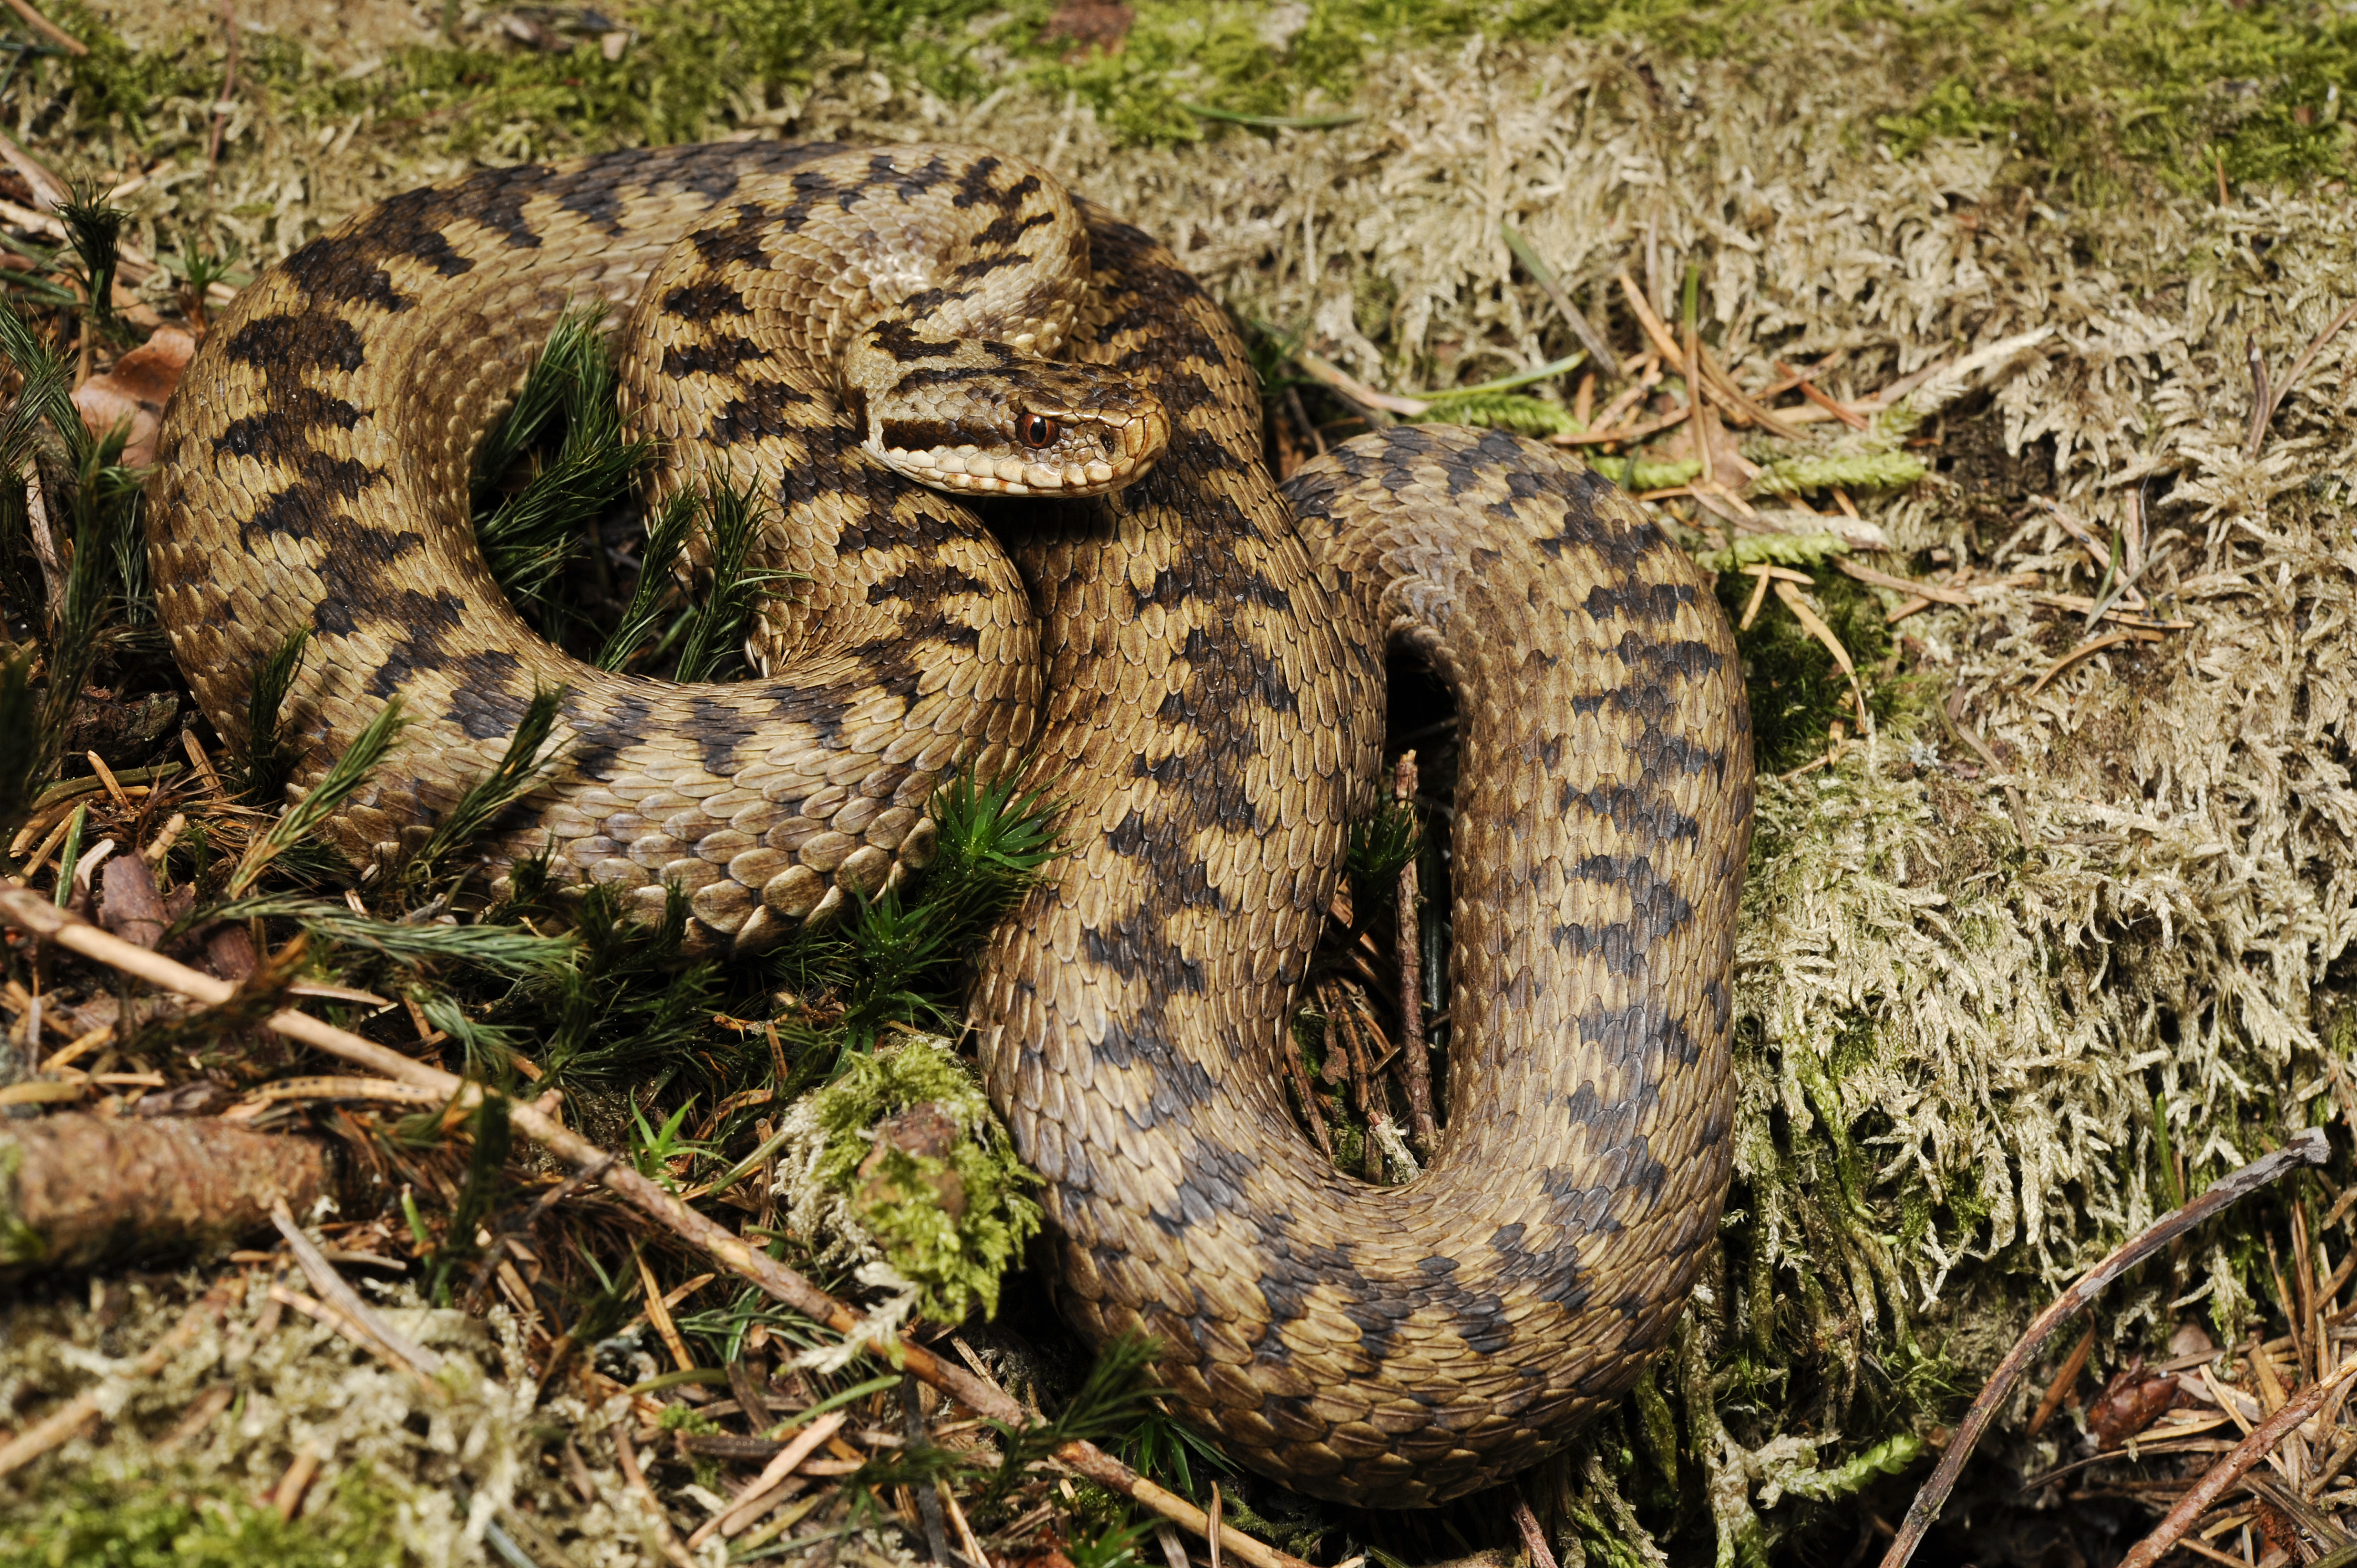 What is the most common snake in England?